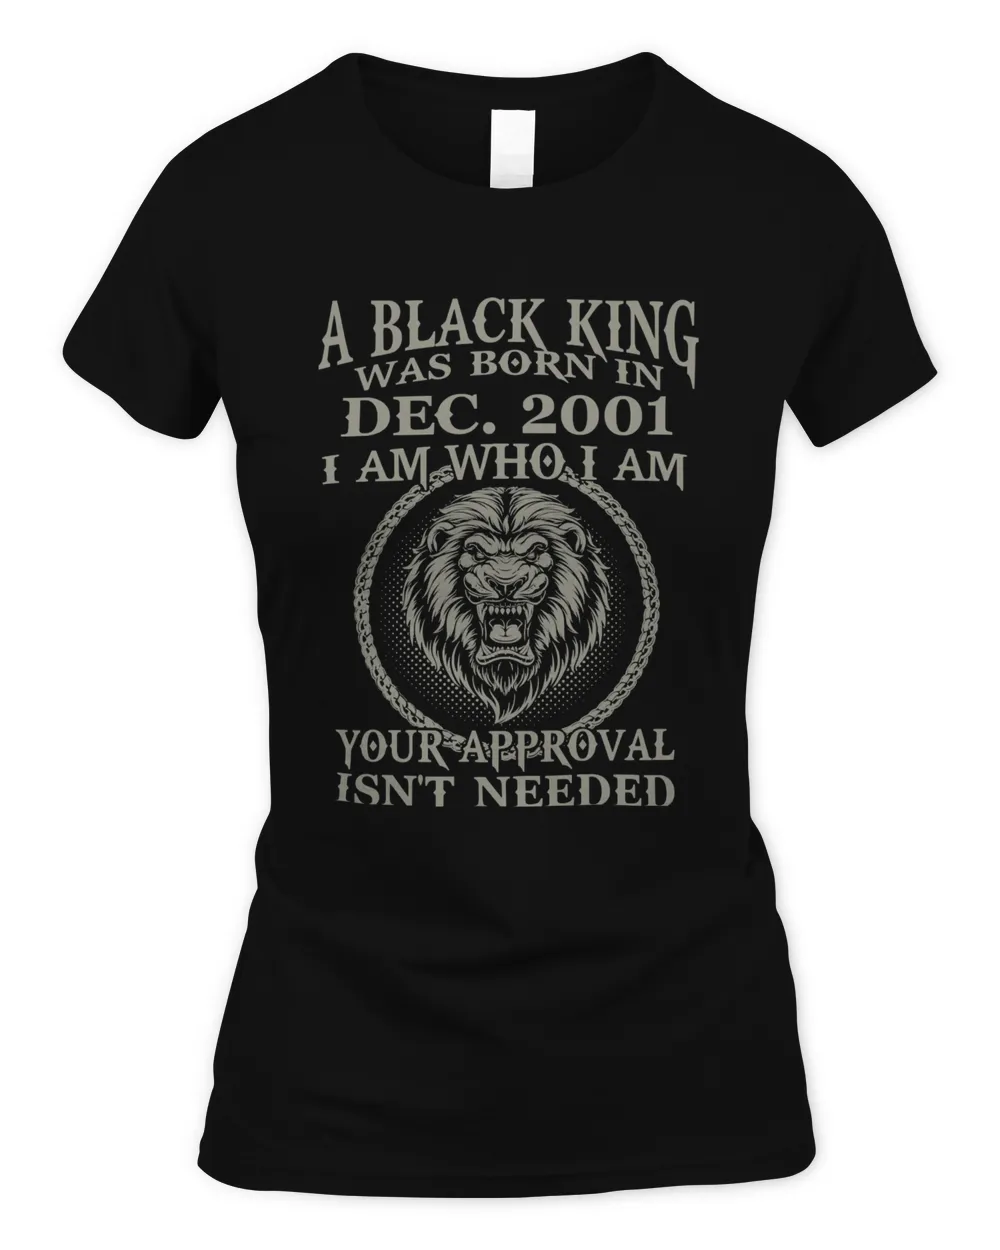 Black King Are Born In DECEMBER 2001. Black King Was Born In DECEMBER 2001 Classic T-Shirt